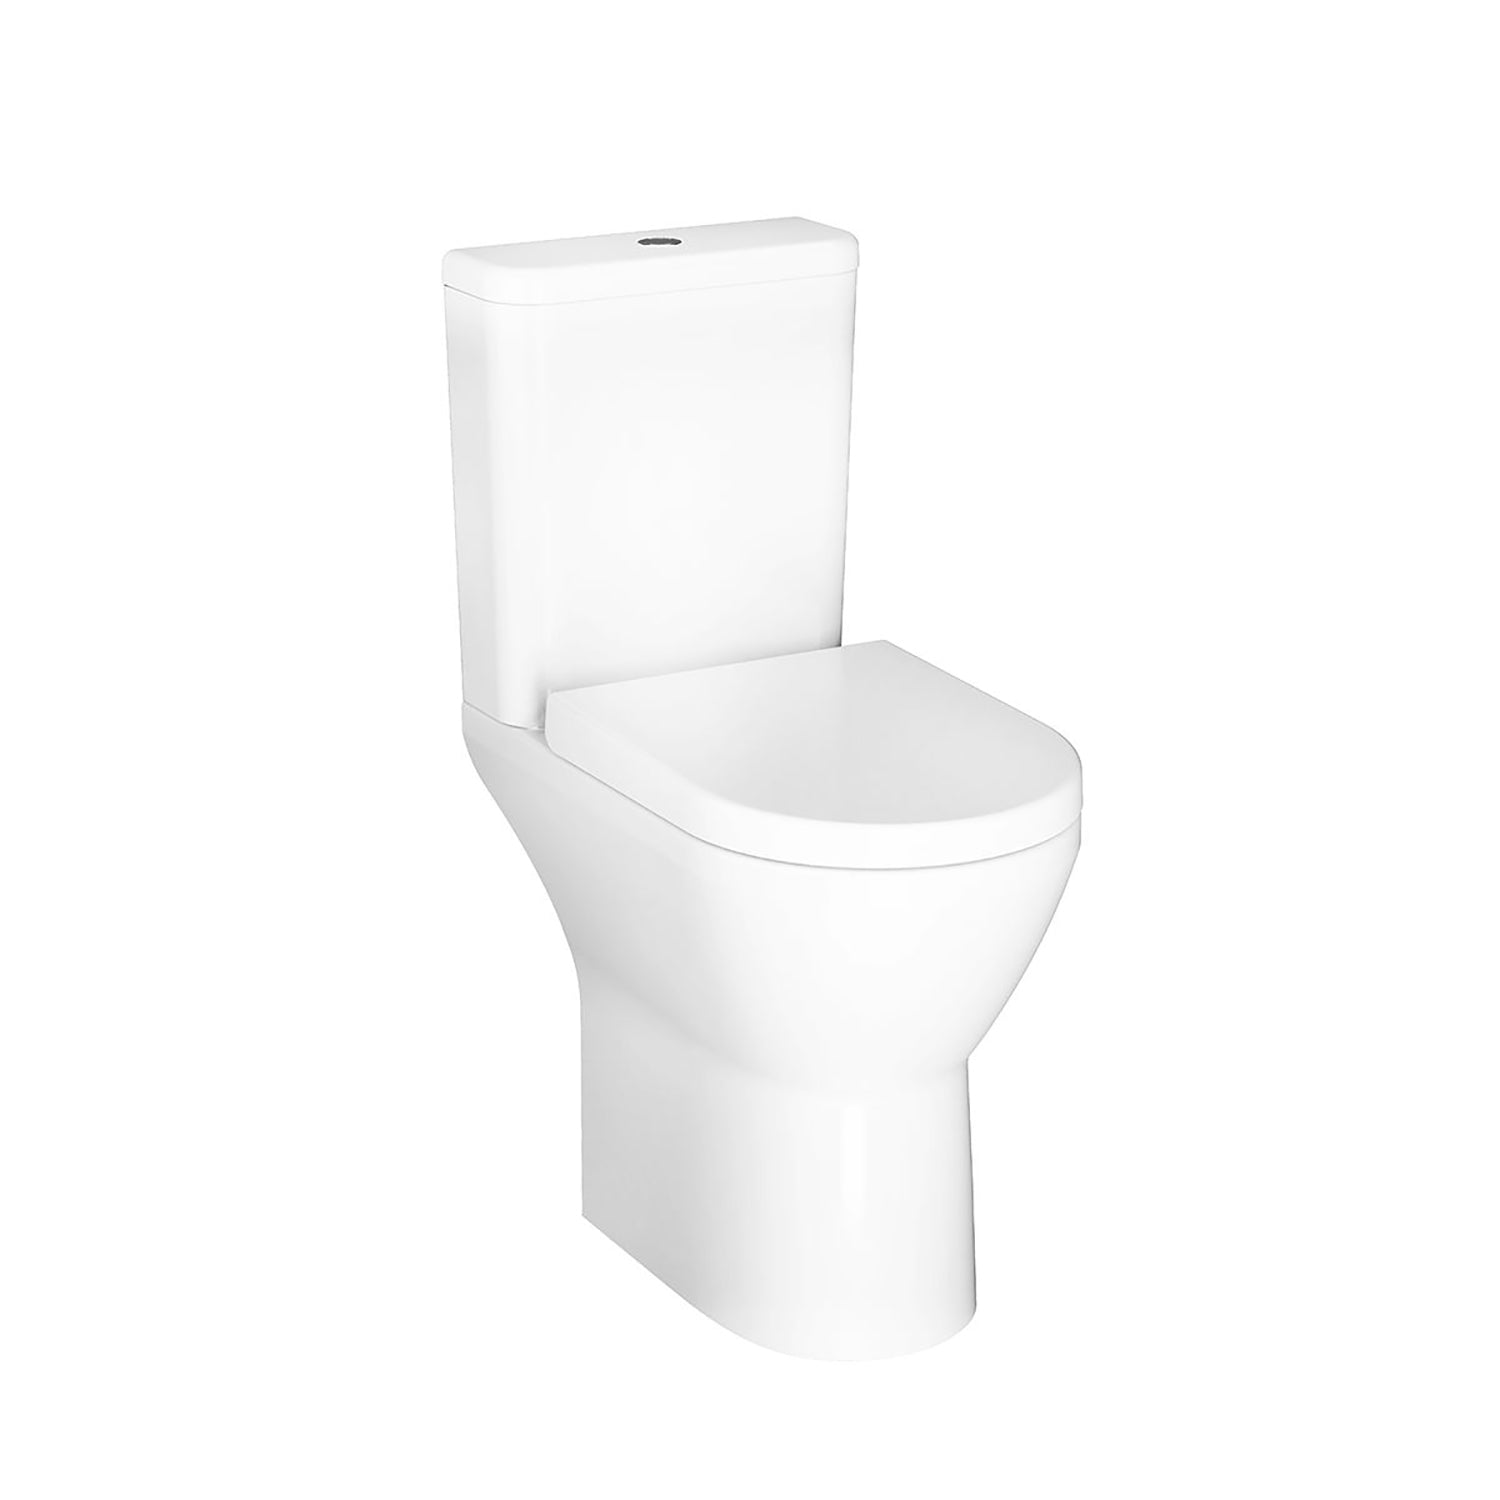 Vesta comfort height close coupled toilet in a white finish, 500mm with seat and cover included, cistern not included on a white background.